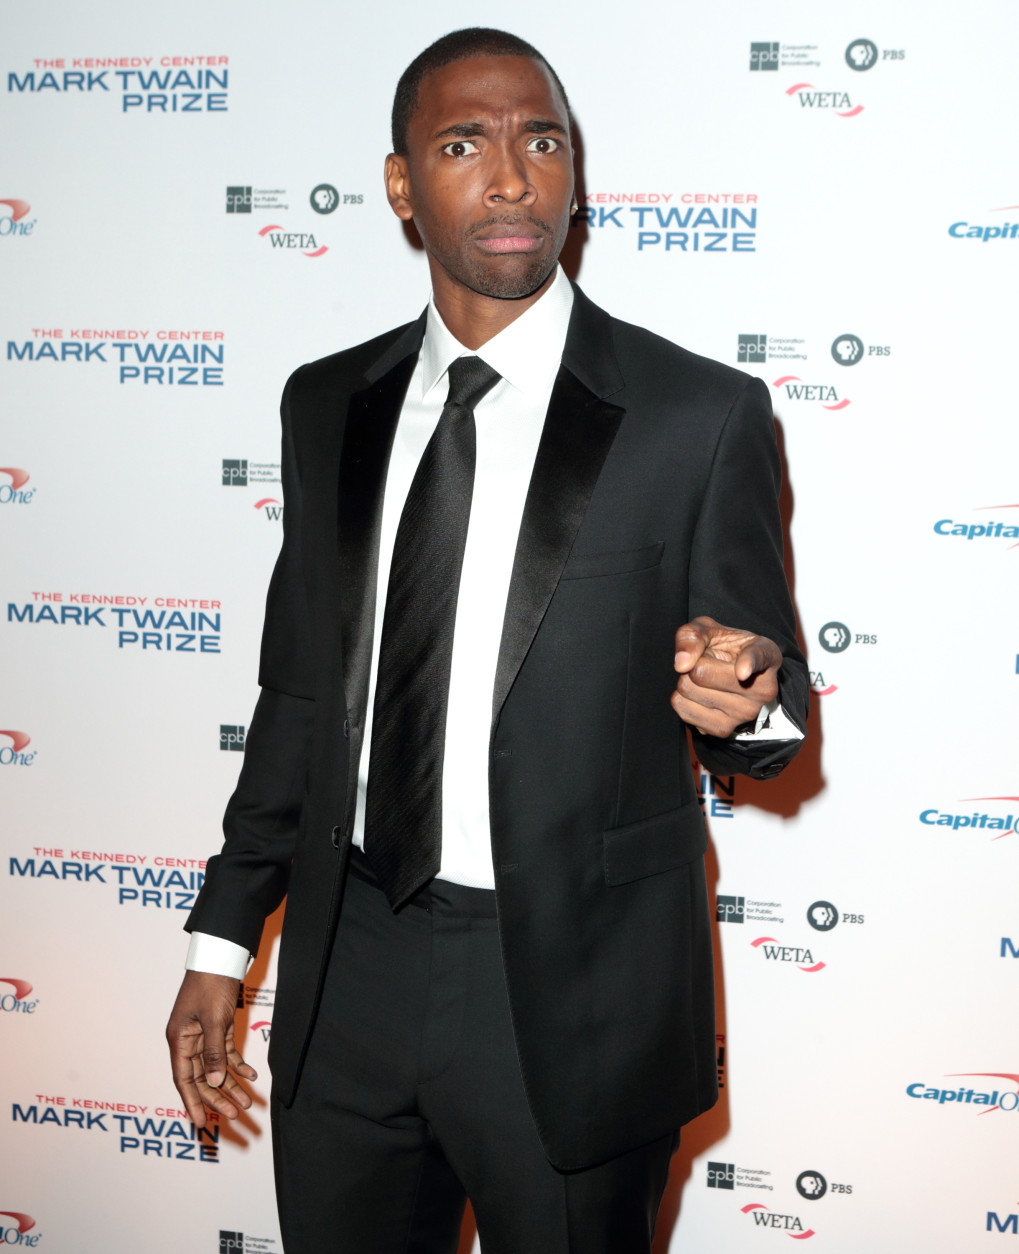 Jay Pharoah arrives at the Kennedy Center for the Performing Arts for the 18th Annual Mark Twain Prize for American Humor presented to Eddie Murphy on Sunday, Oct. 18, 2015, in Washington. (Photo by Owen Sweeney/Invision/AP)